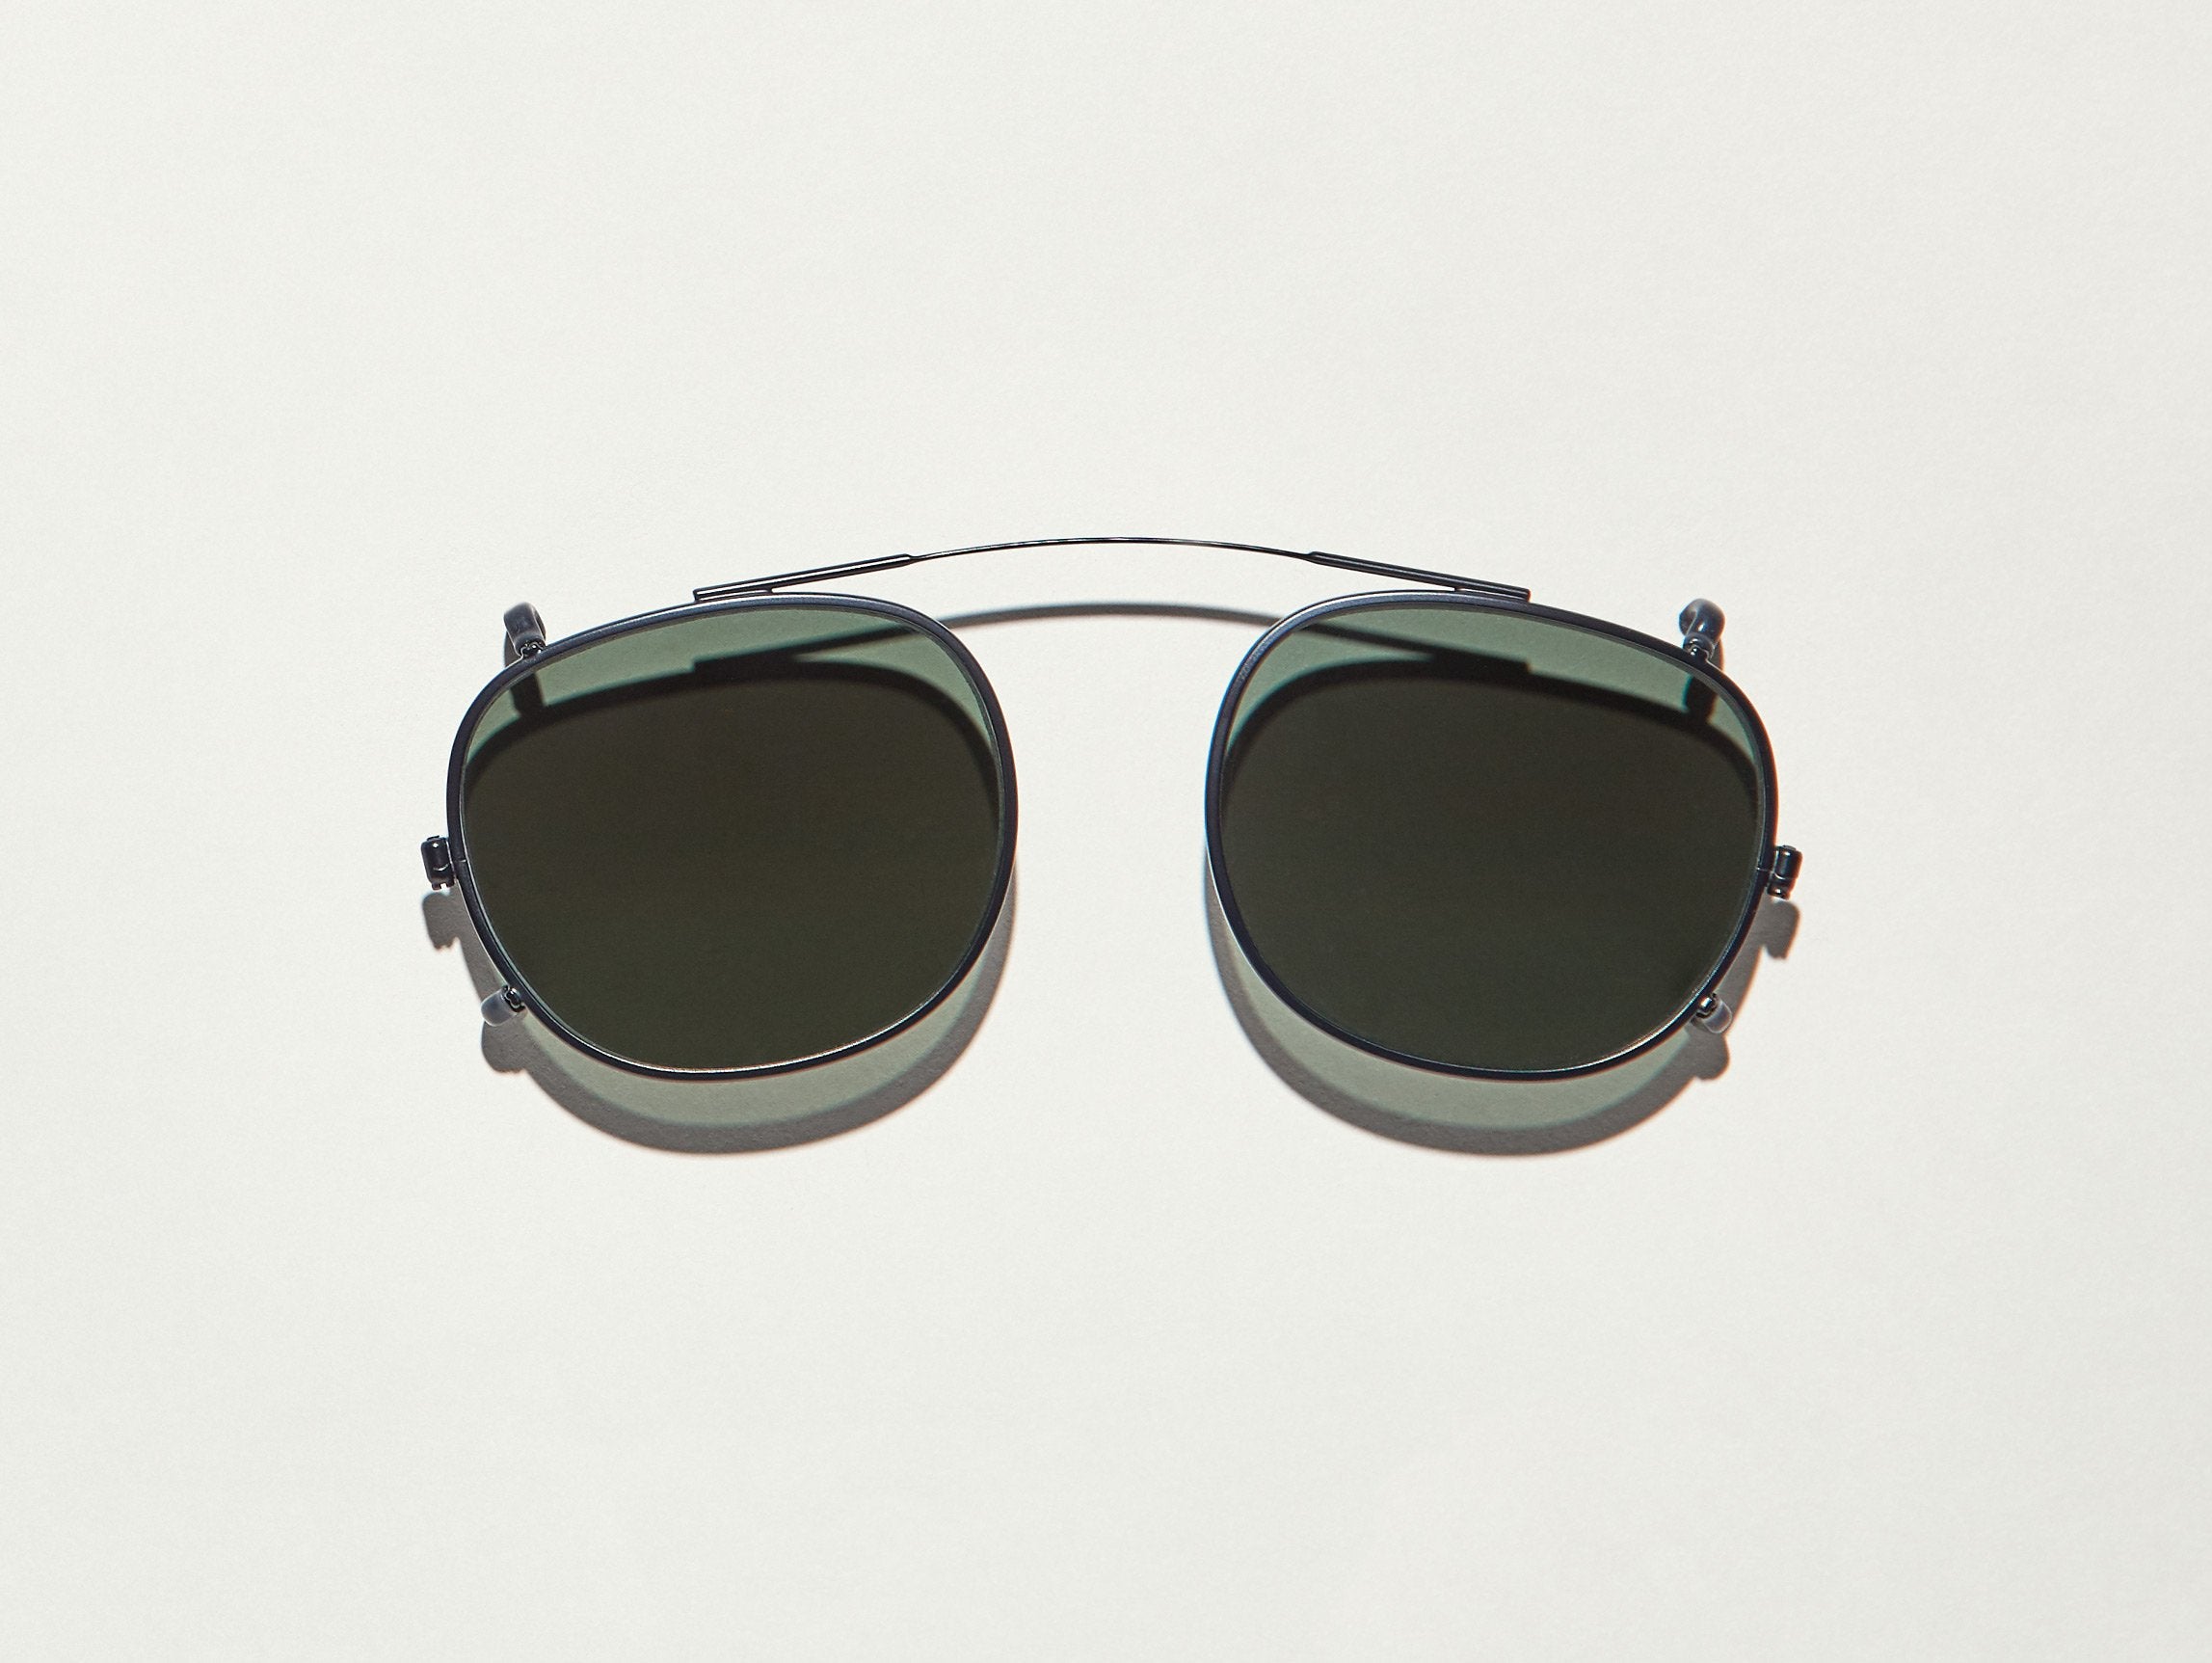 The CLIPTOSH in Matte Black with G-15 Lenses